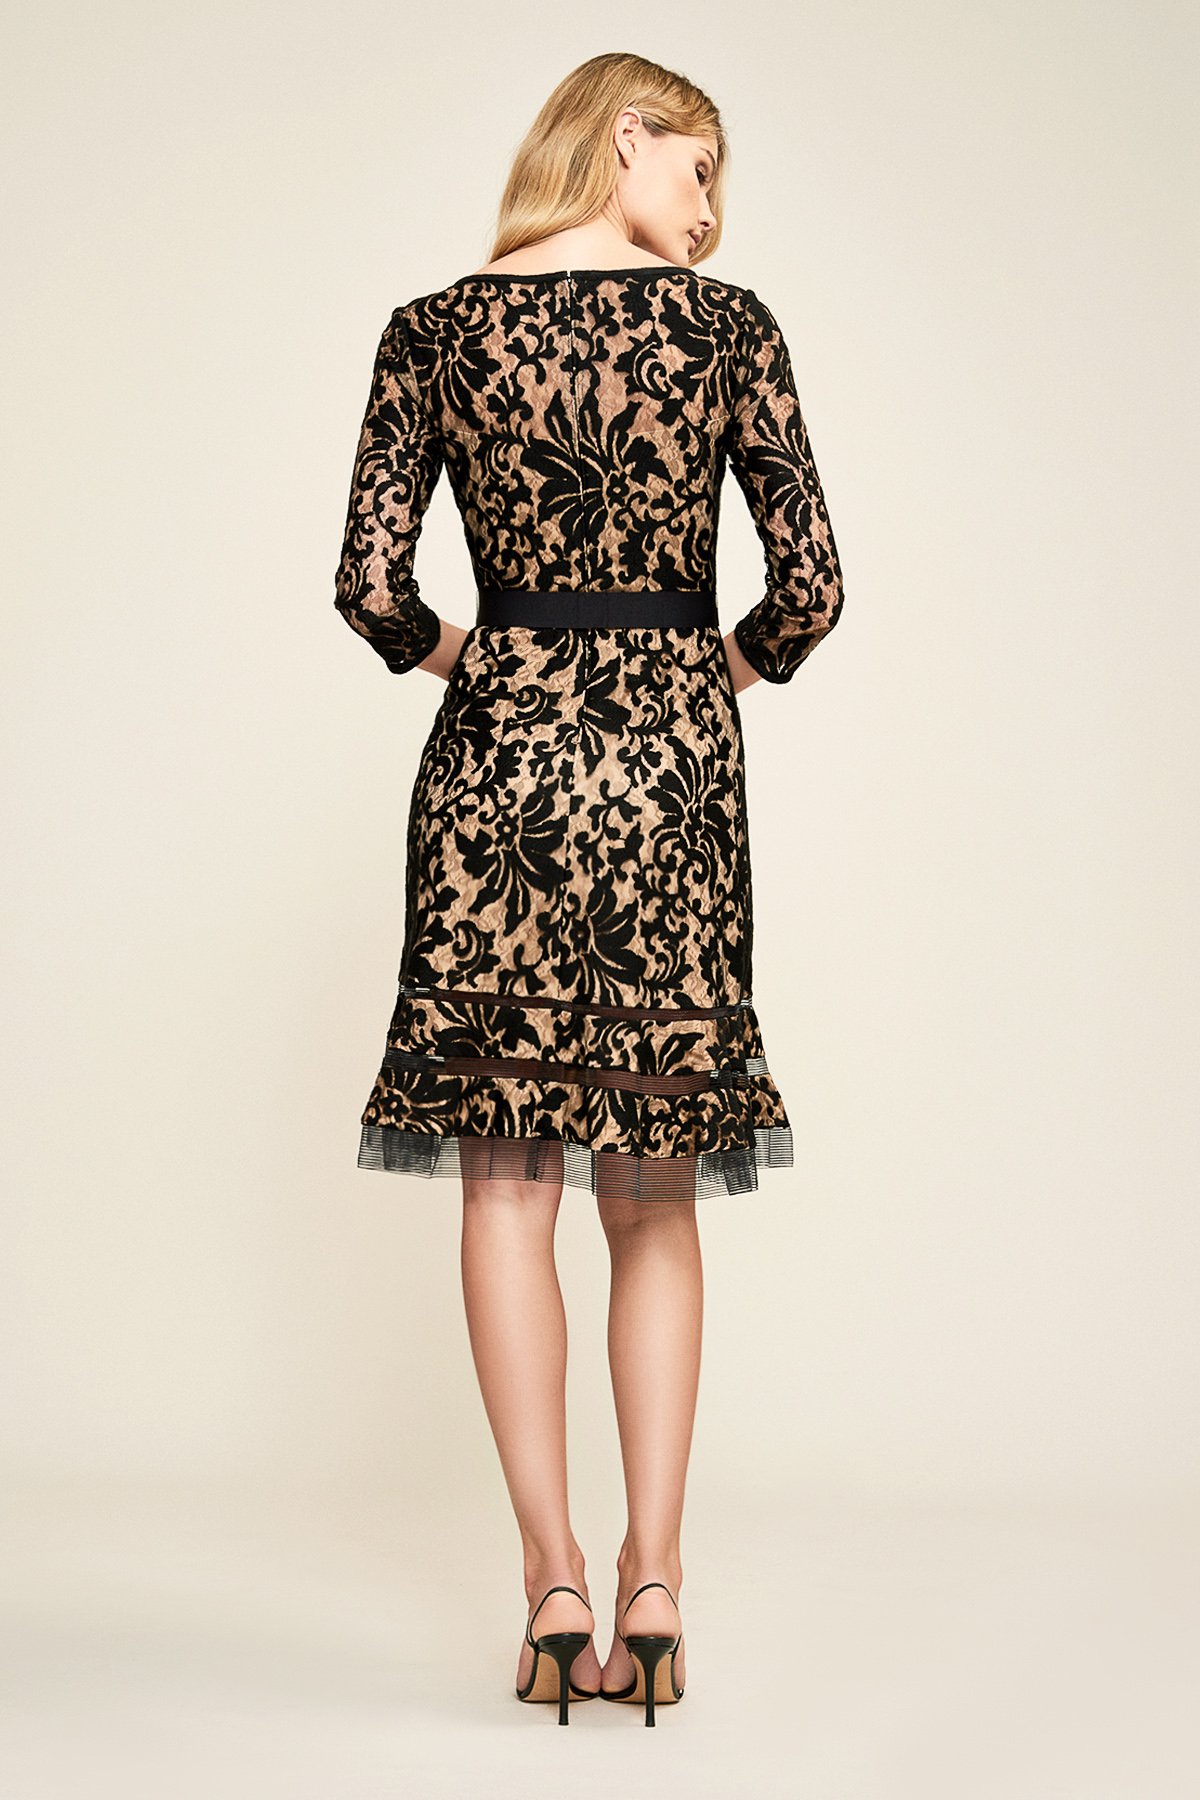 Embroidered Lace 3/4 Sleeve Dress with Sheer Cut Out Detail - PETITE